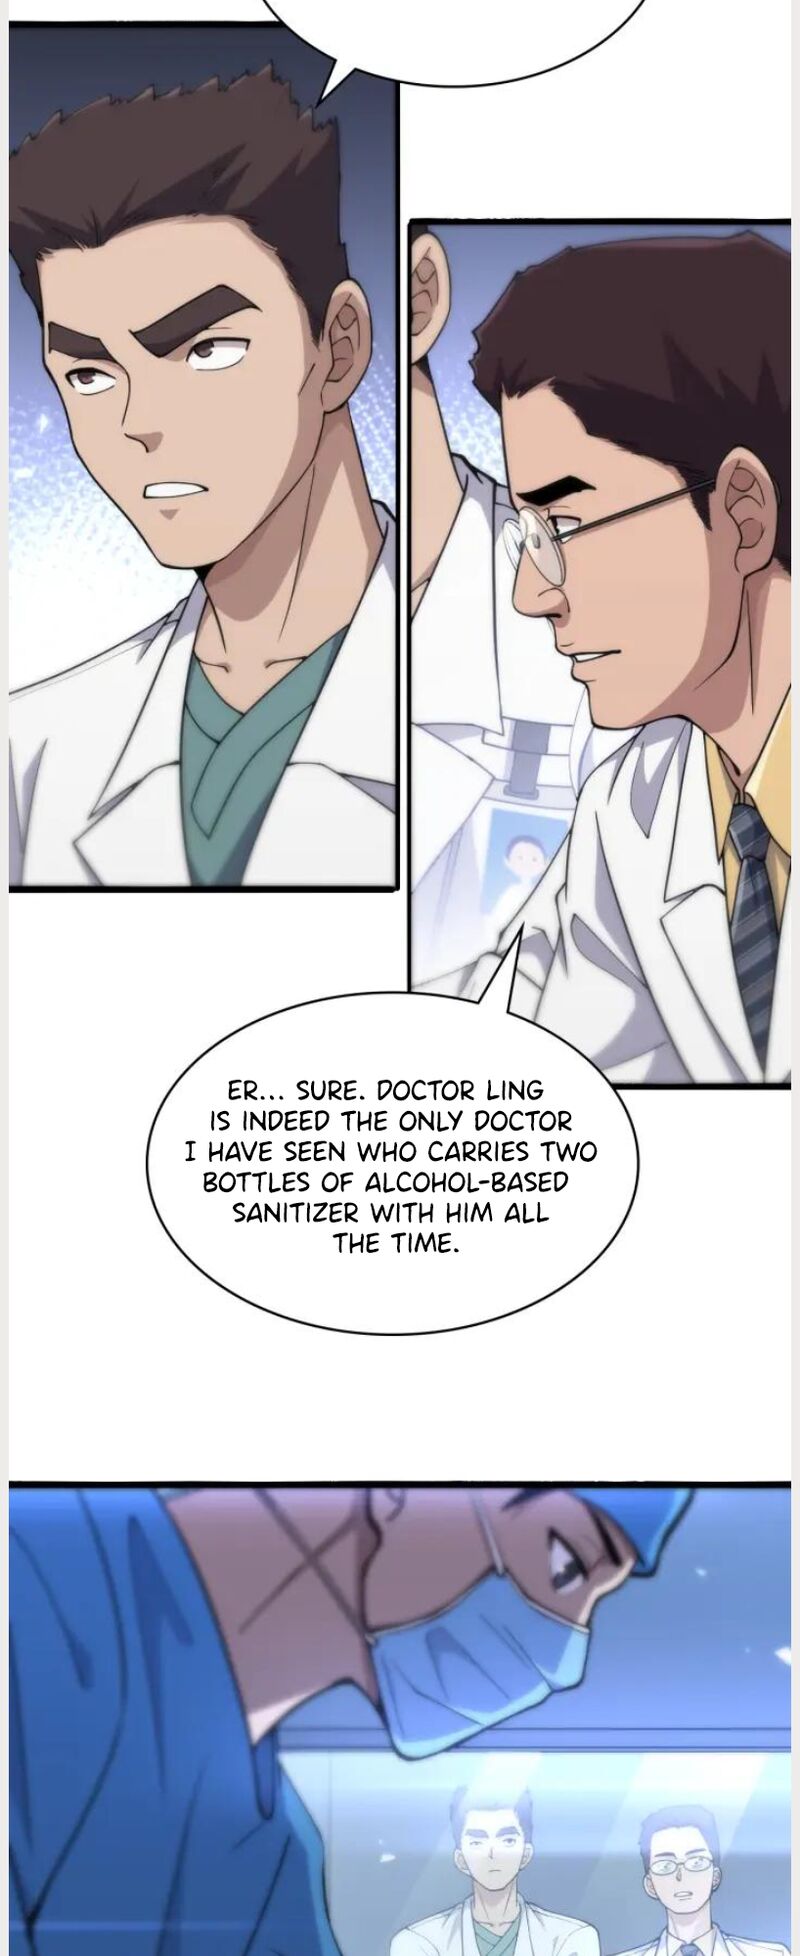 great_doctor_ling_ran_134_17